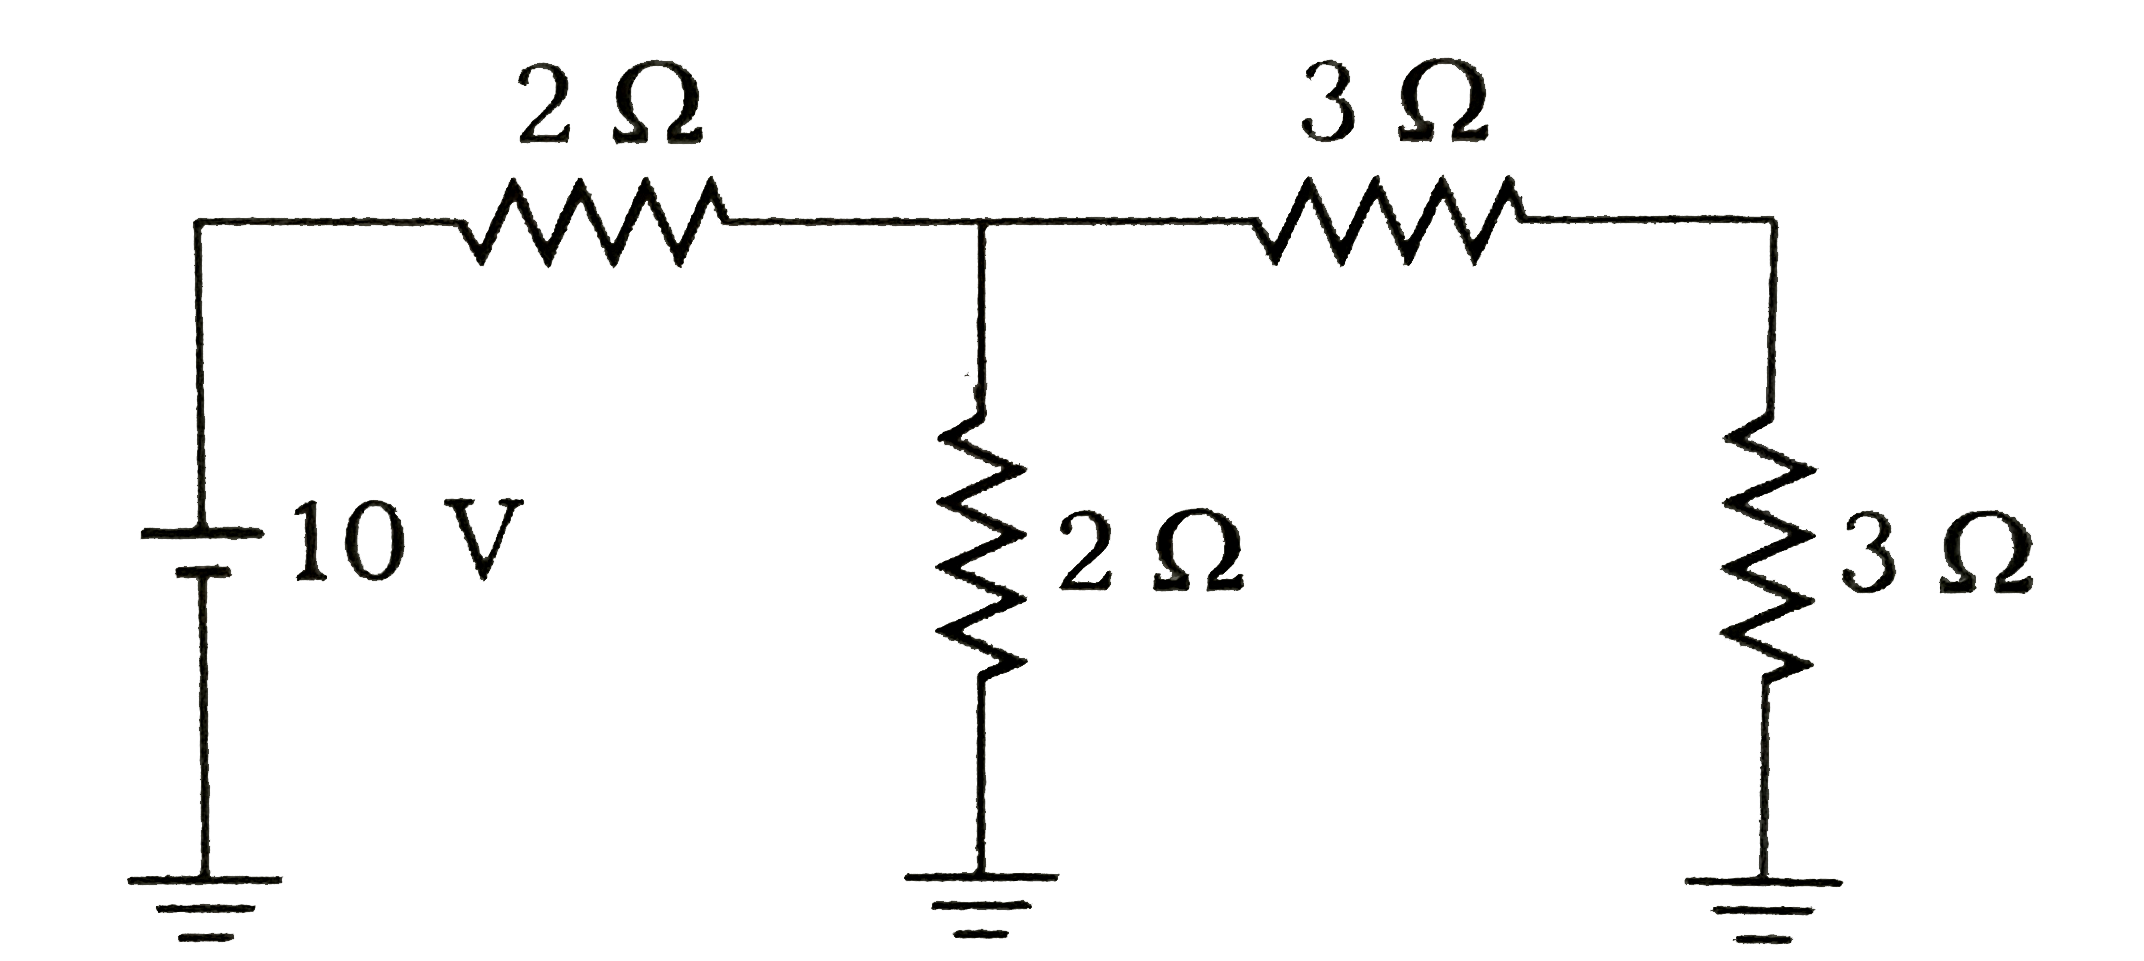 In the circuit shown, the current in 3Omega resistance is